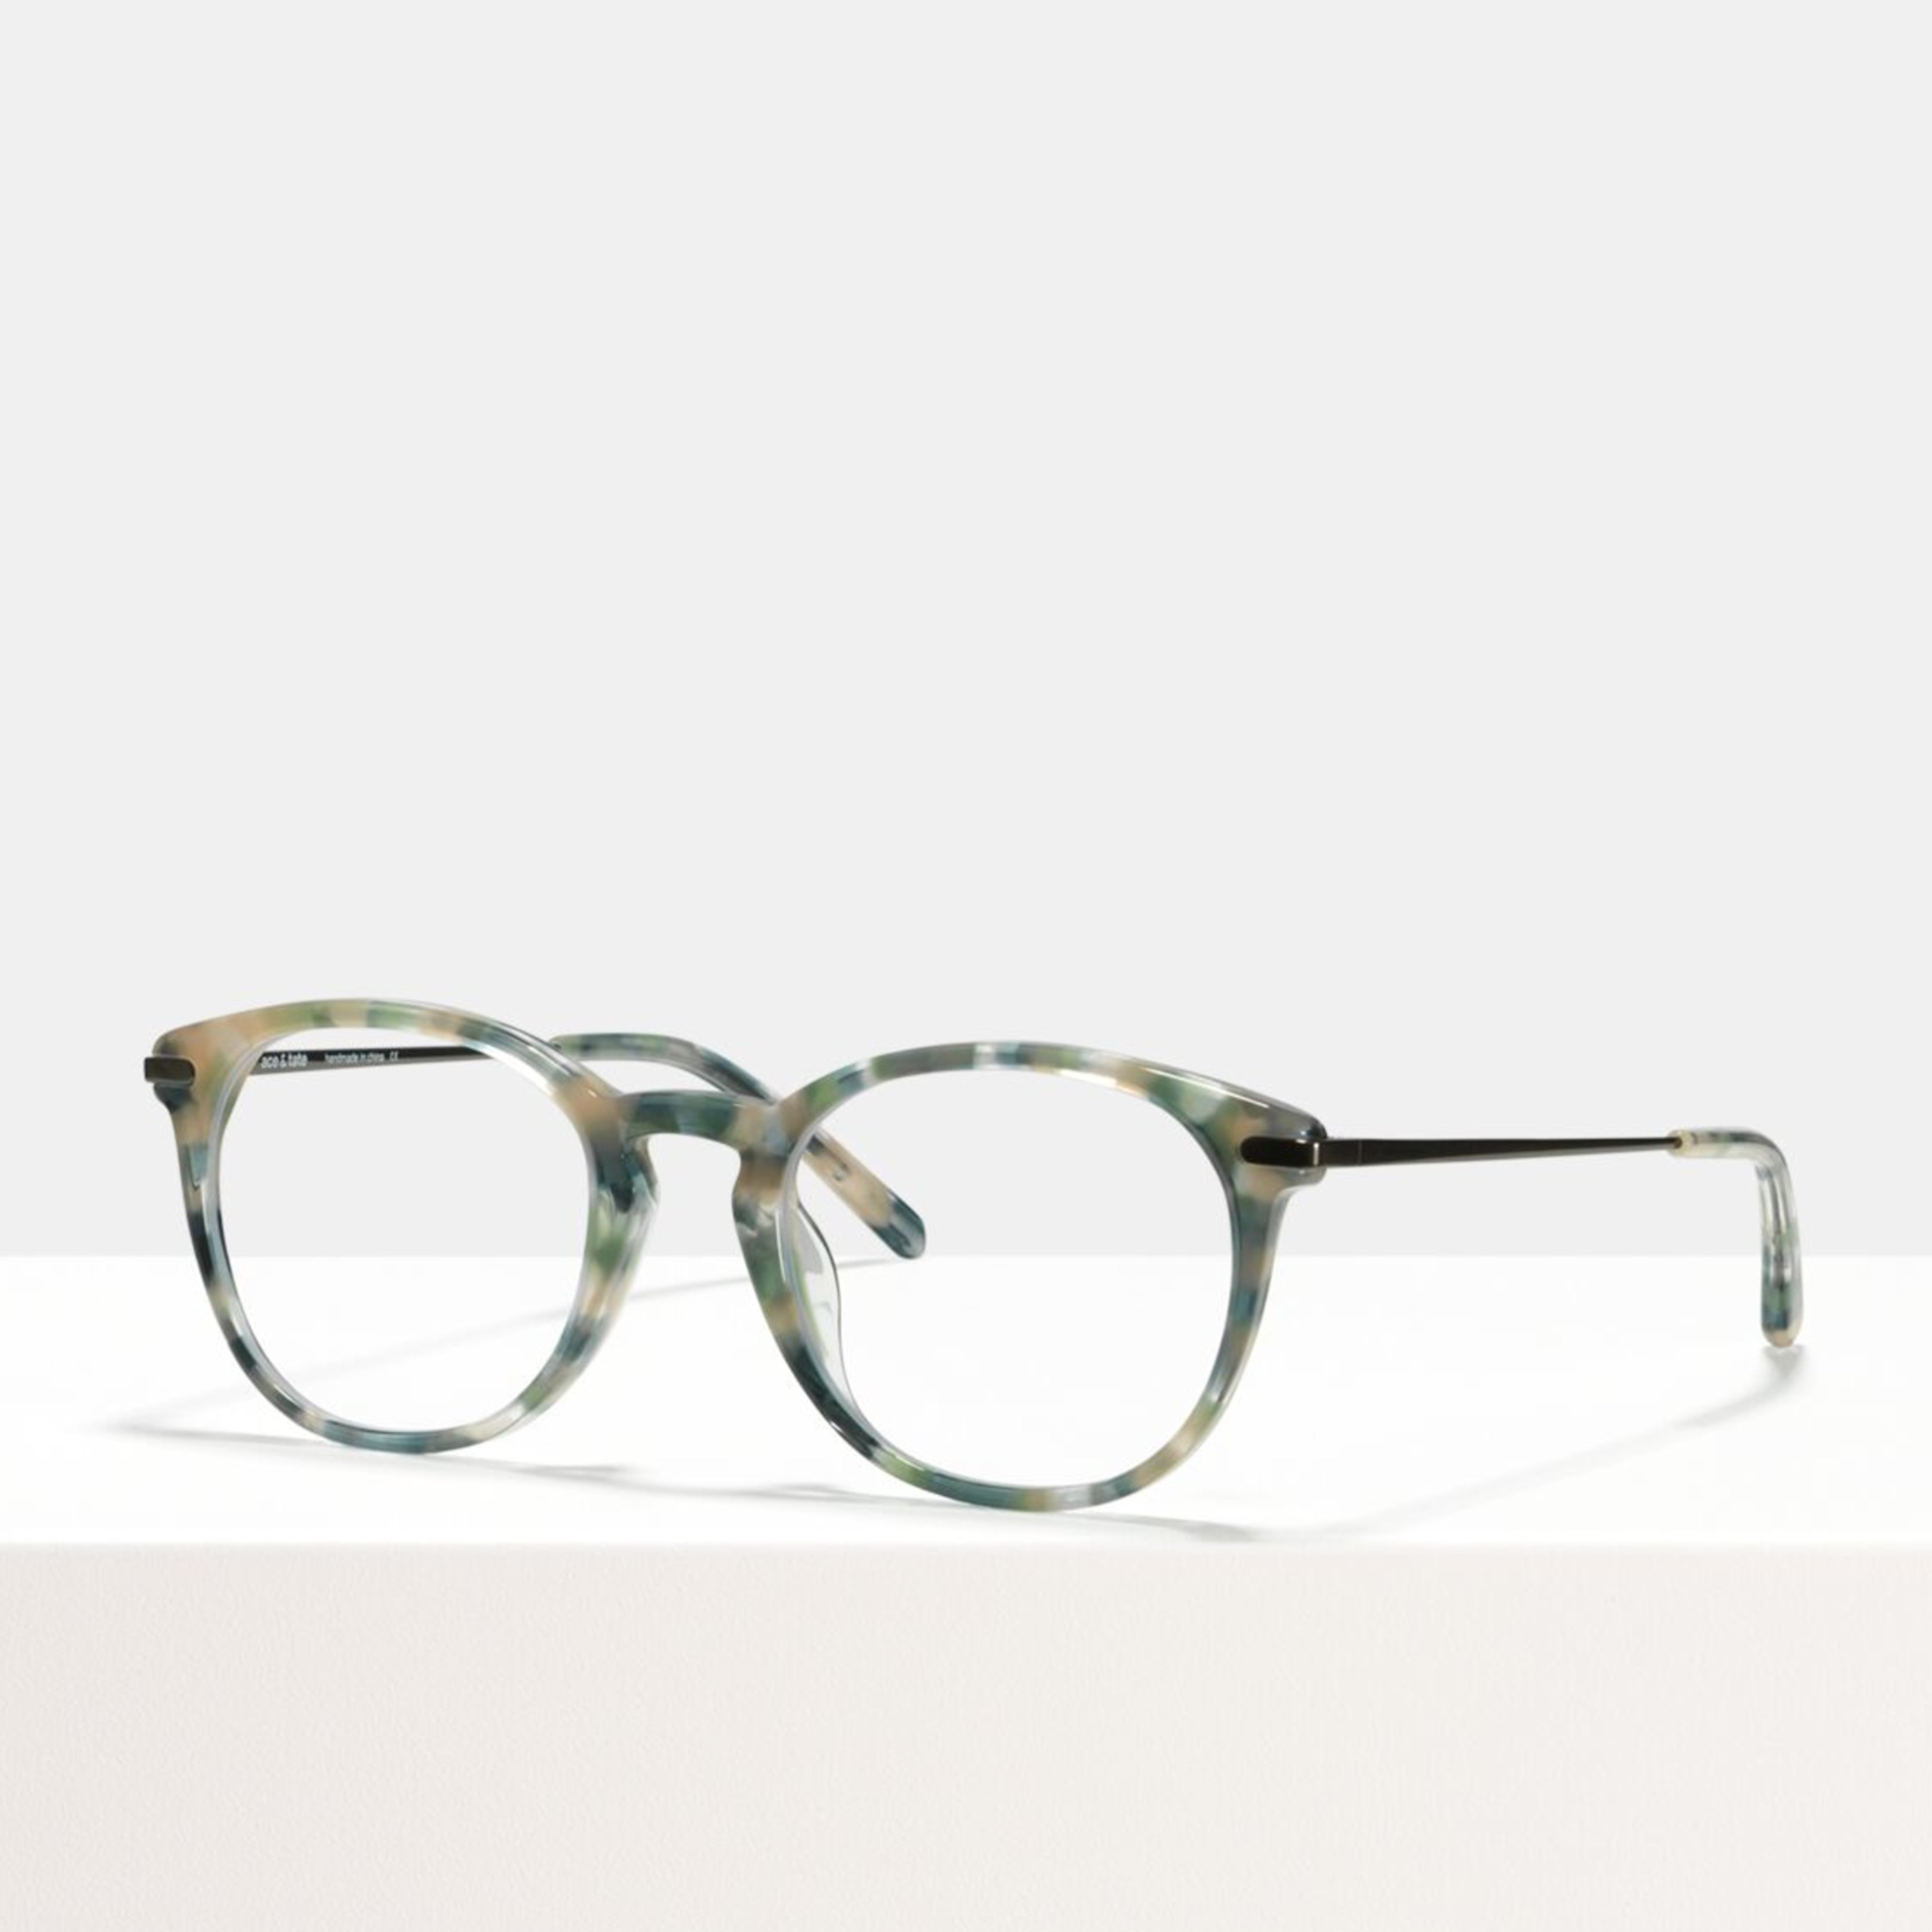 Ace & Tate Glasses | round acetate in Beige, Blue, Green, Grey, multicolor